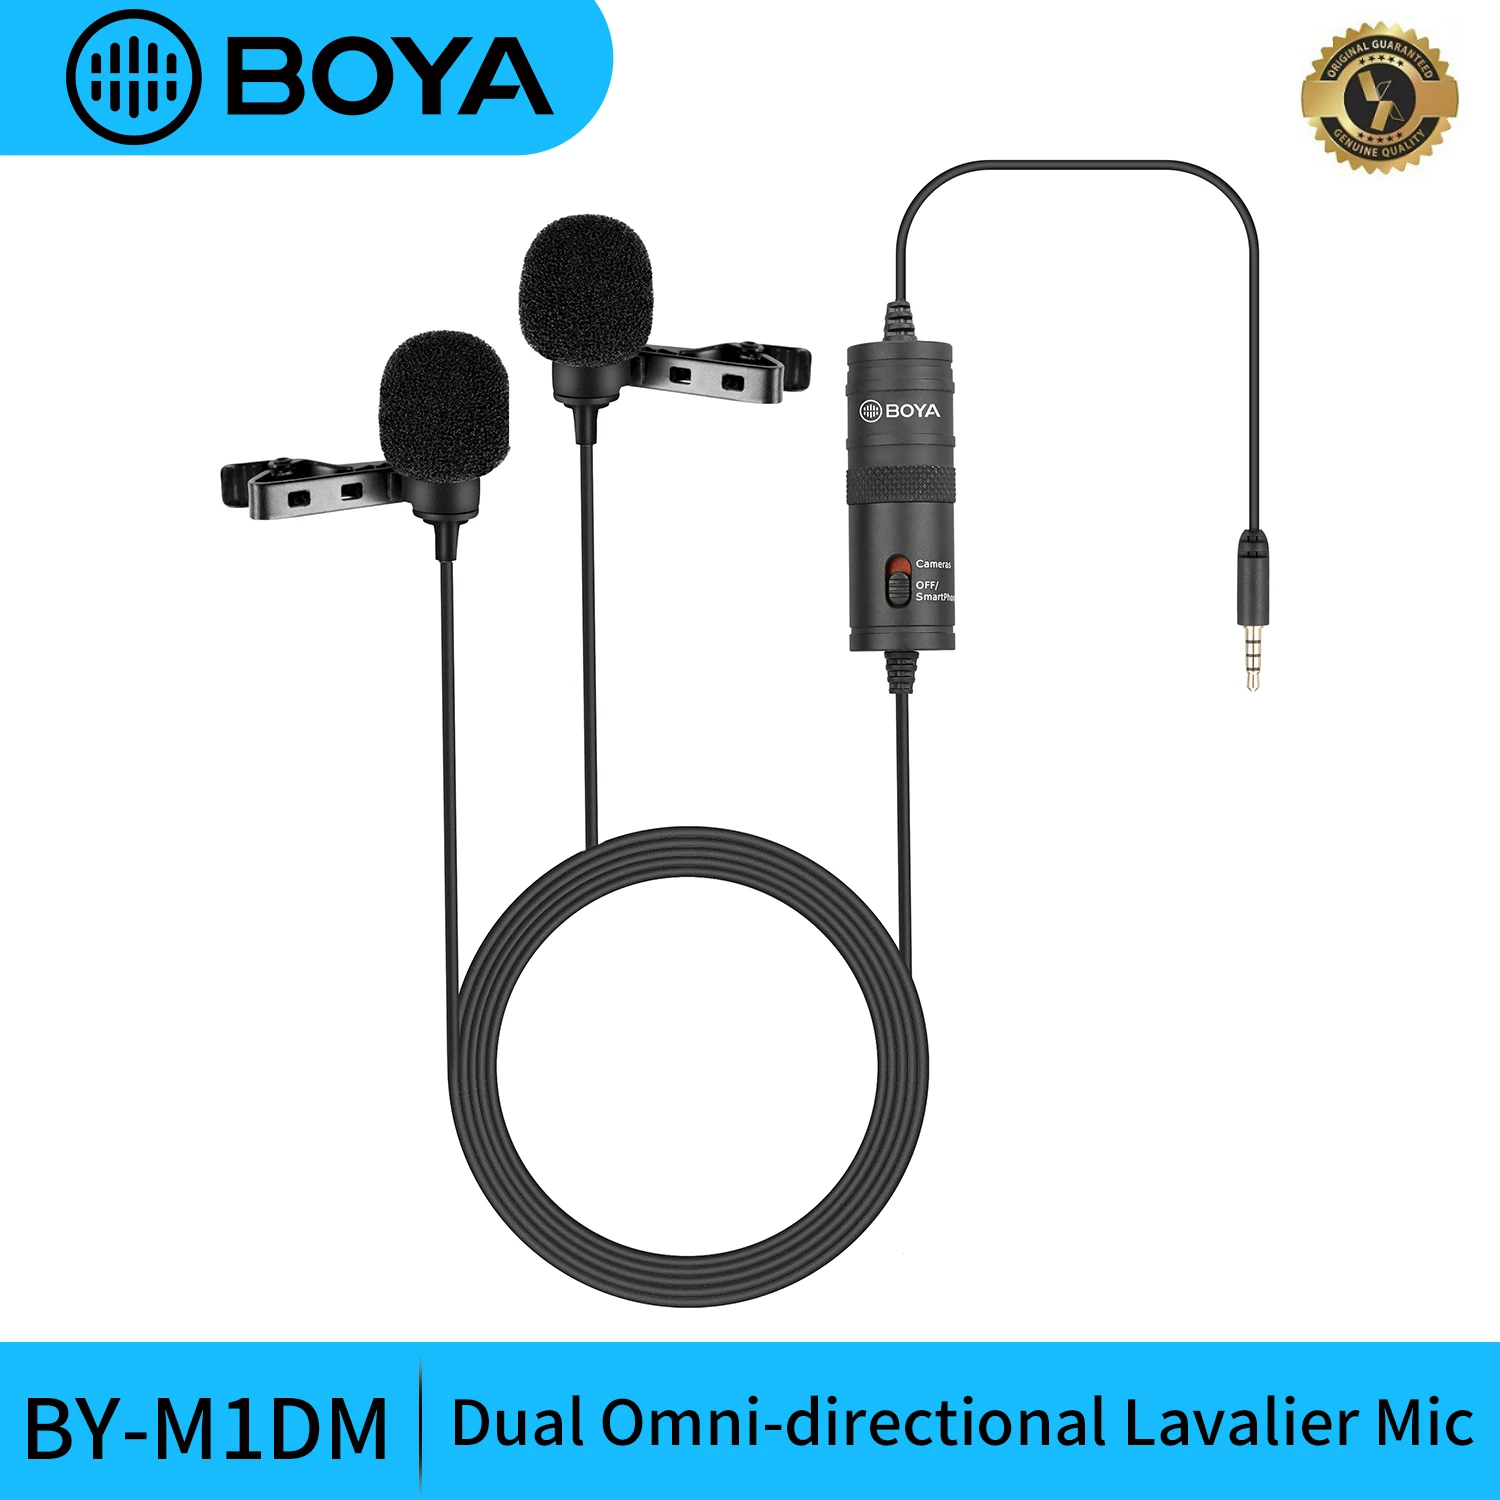 

BOYA BY-M1DM Dual Lavalier Microphones Omnidirectional Condenser Clip-on Lapel Mic for DSLR Camera IOS Device Live Interview